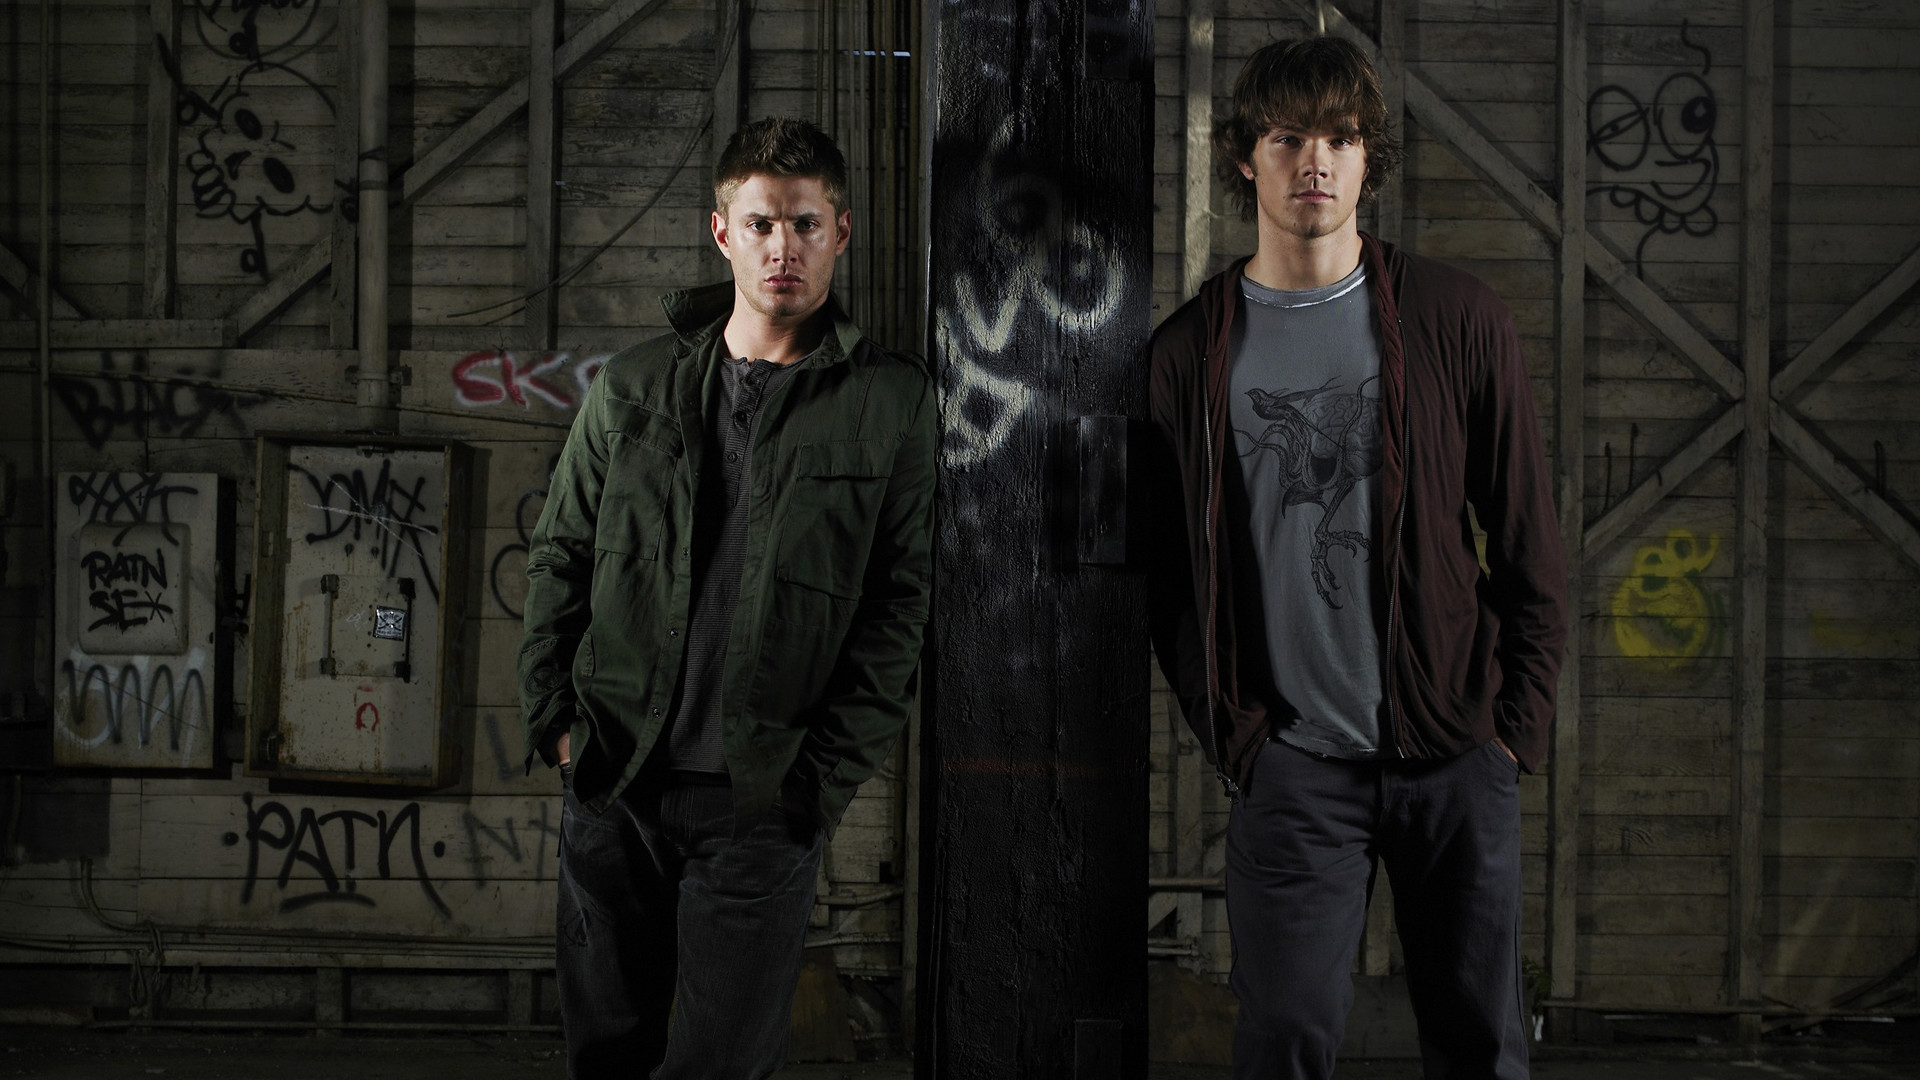 1920x1080  Awesome Supernatural Wallpaper